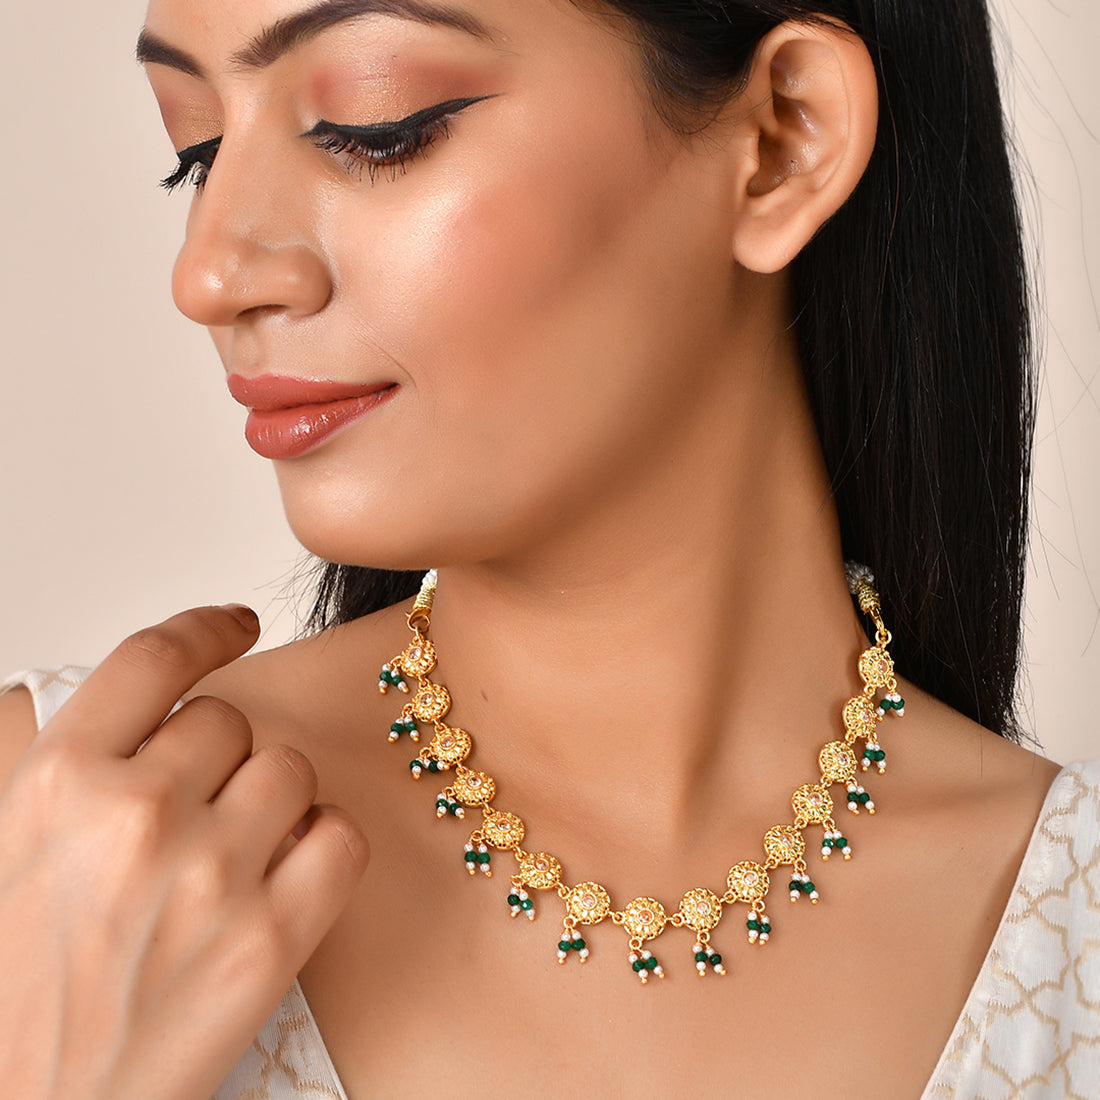 Abharan Jewellers - Feel like a princess with this intricately carved pearl  necklace. Offer: ₹100 off on per gram of gold and 5% off on diamonds. Avail  the offer here: http://ow.ly/Ax9I50ylLRE #Abharan #